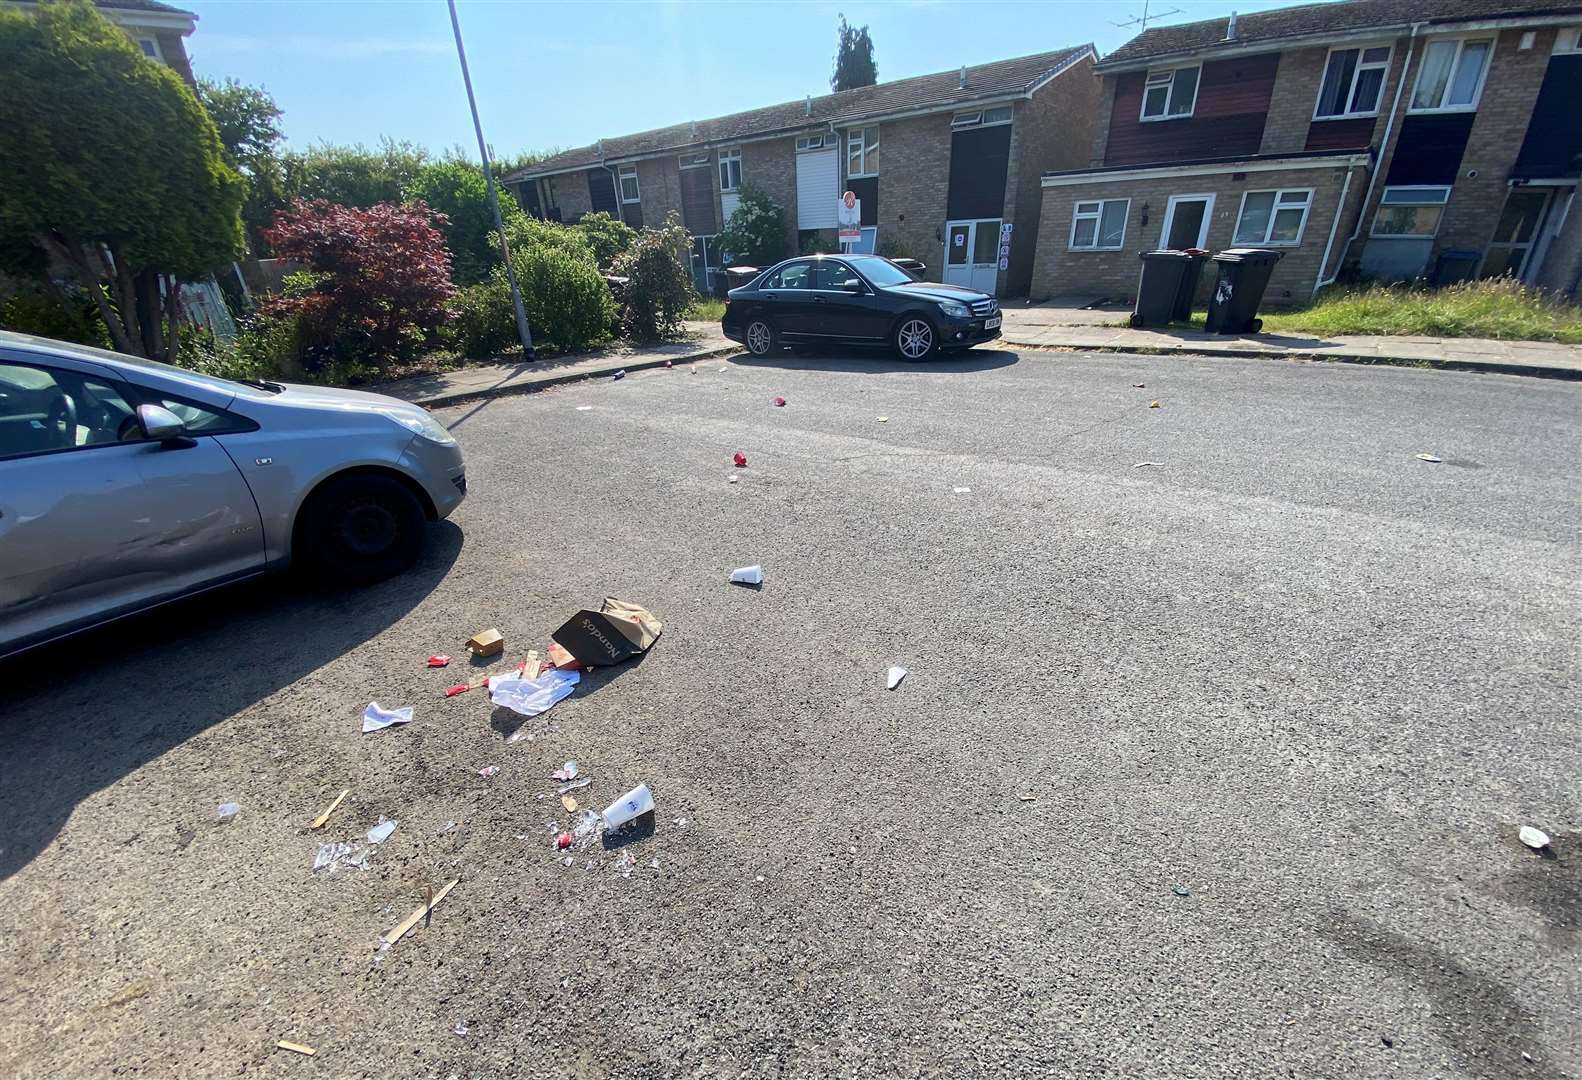 The party-goers left plastic cups, broken glass and rubbish strewn across Kemsing Gardens in Canterbury. Photo: Paul Babra